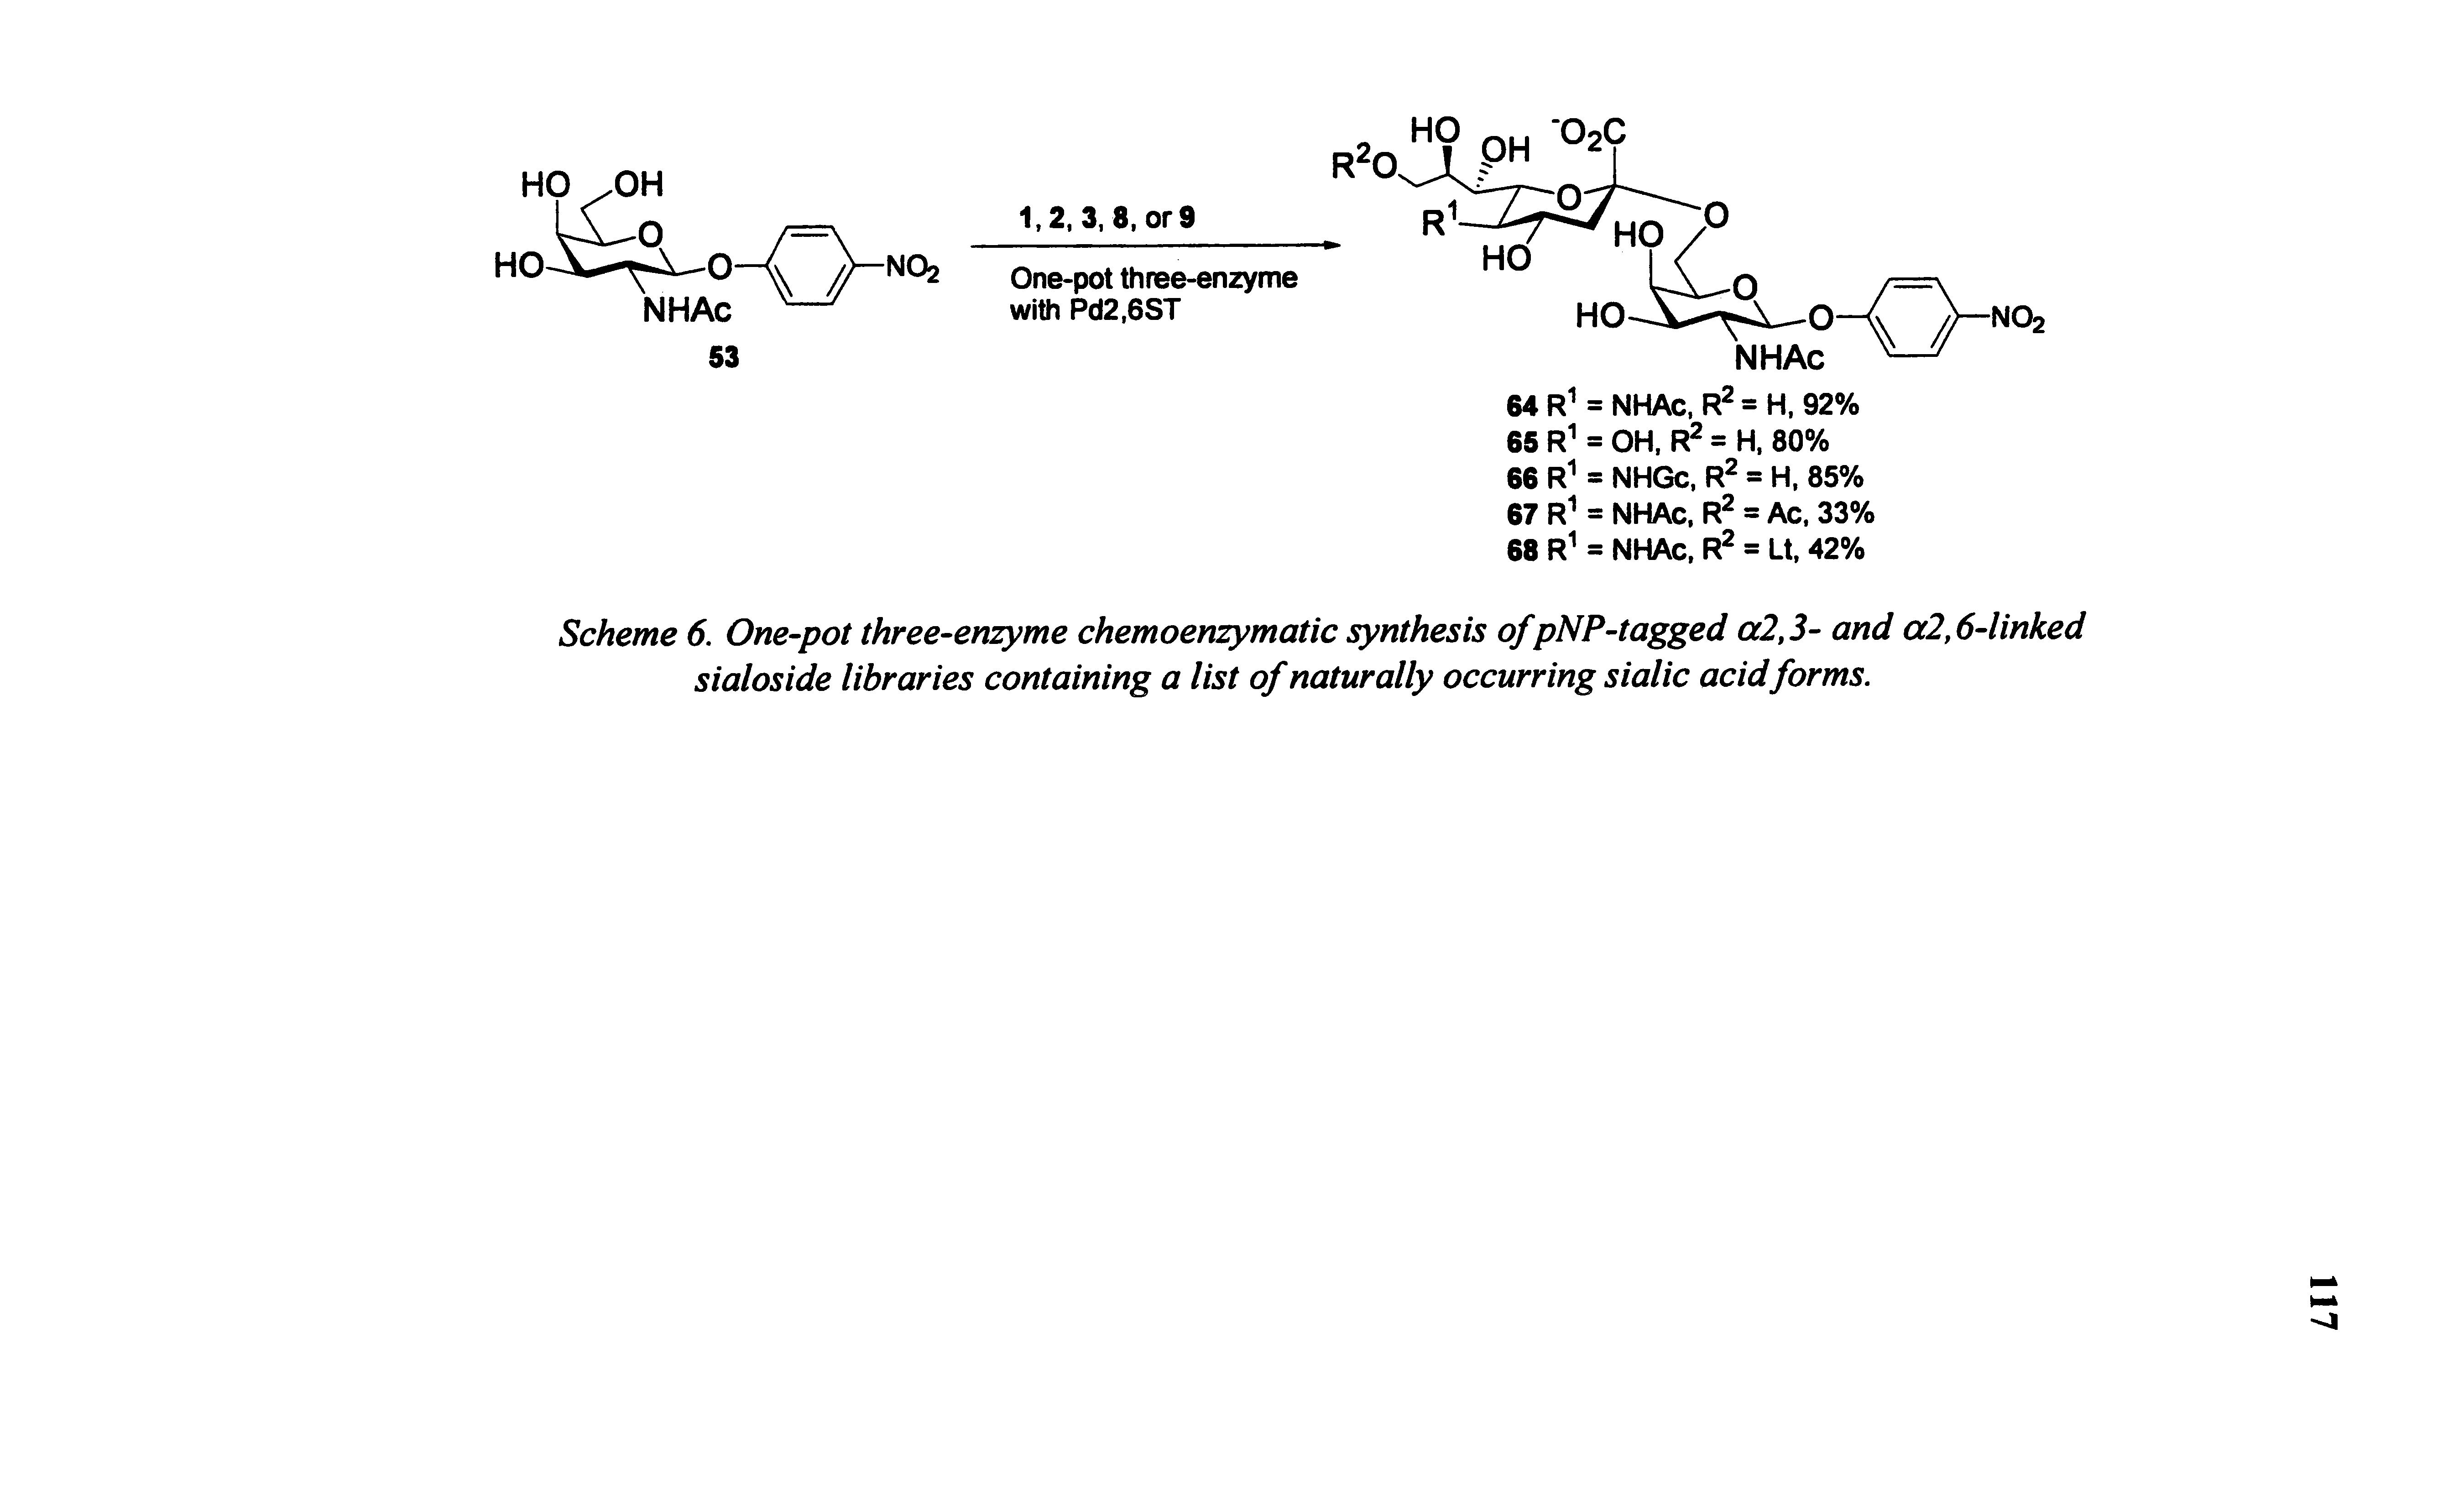 Scheme 6. One-pot three-enzyme chemoenzymatic synthesis of pNP-tagged o2,3- and a2,6-linked sialoside libraries containing a list of naturally occurring sialic acidforms.